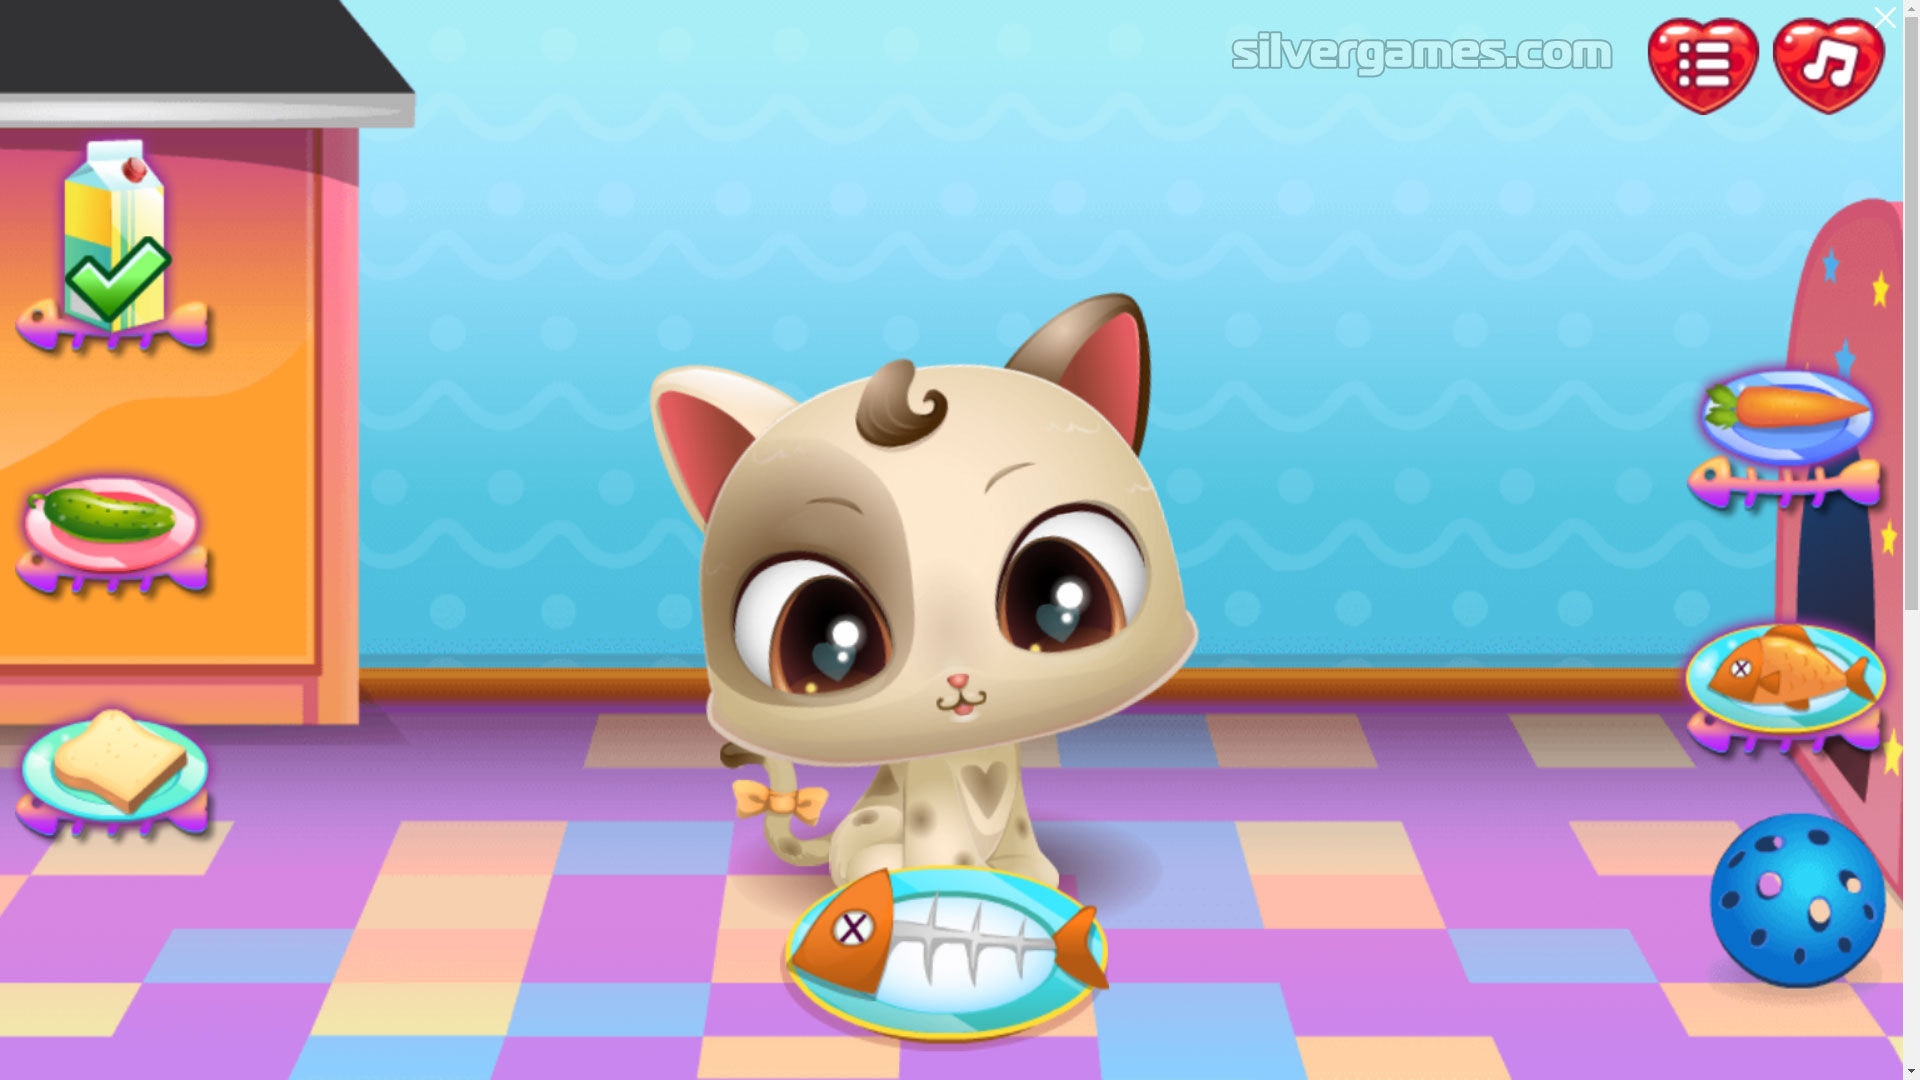 FUNNY KITTY CARE - Play Online for Free!